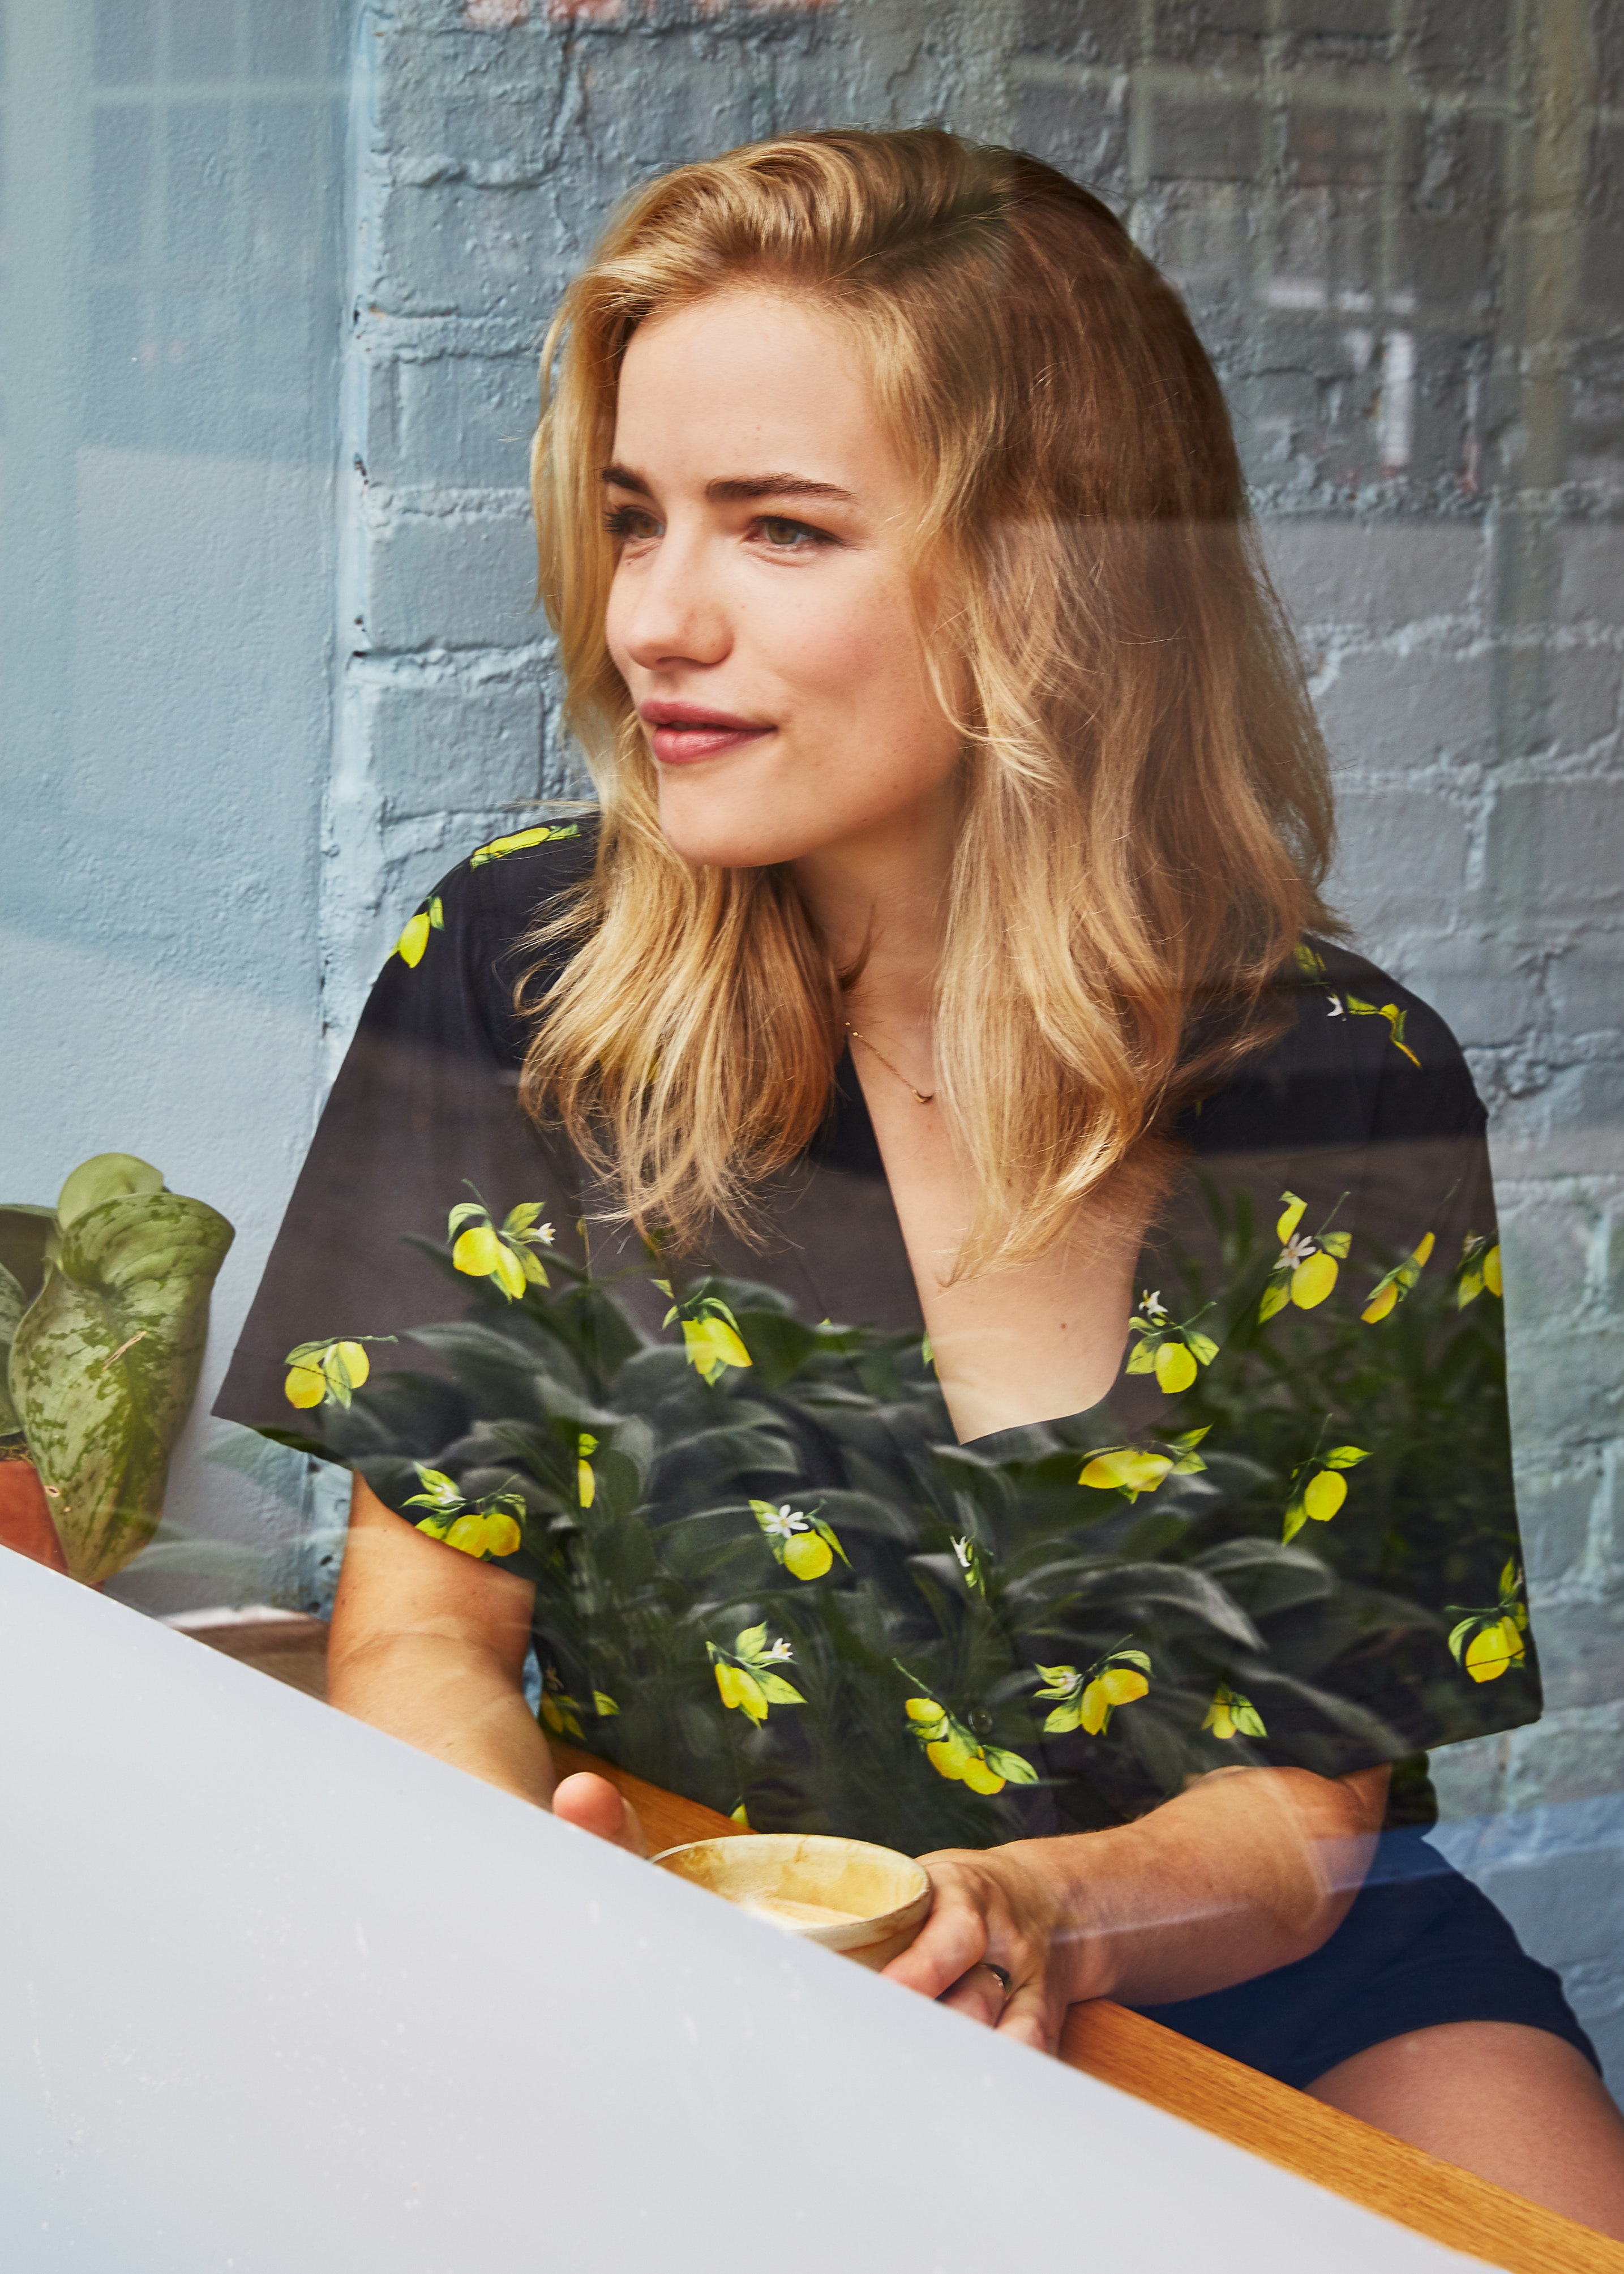 Willa Fitzgerald's Work Day Involves Morning Reading and Dancing Around 'Like a Lunatic'. Bon Appétit